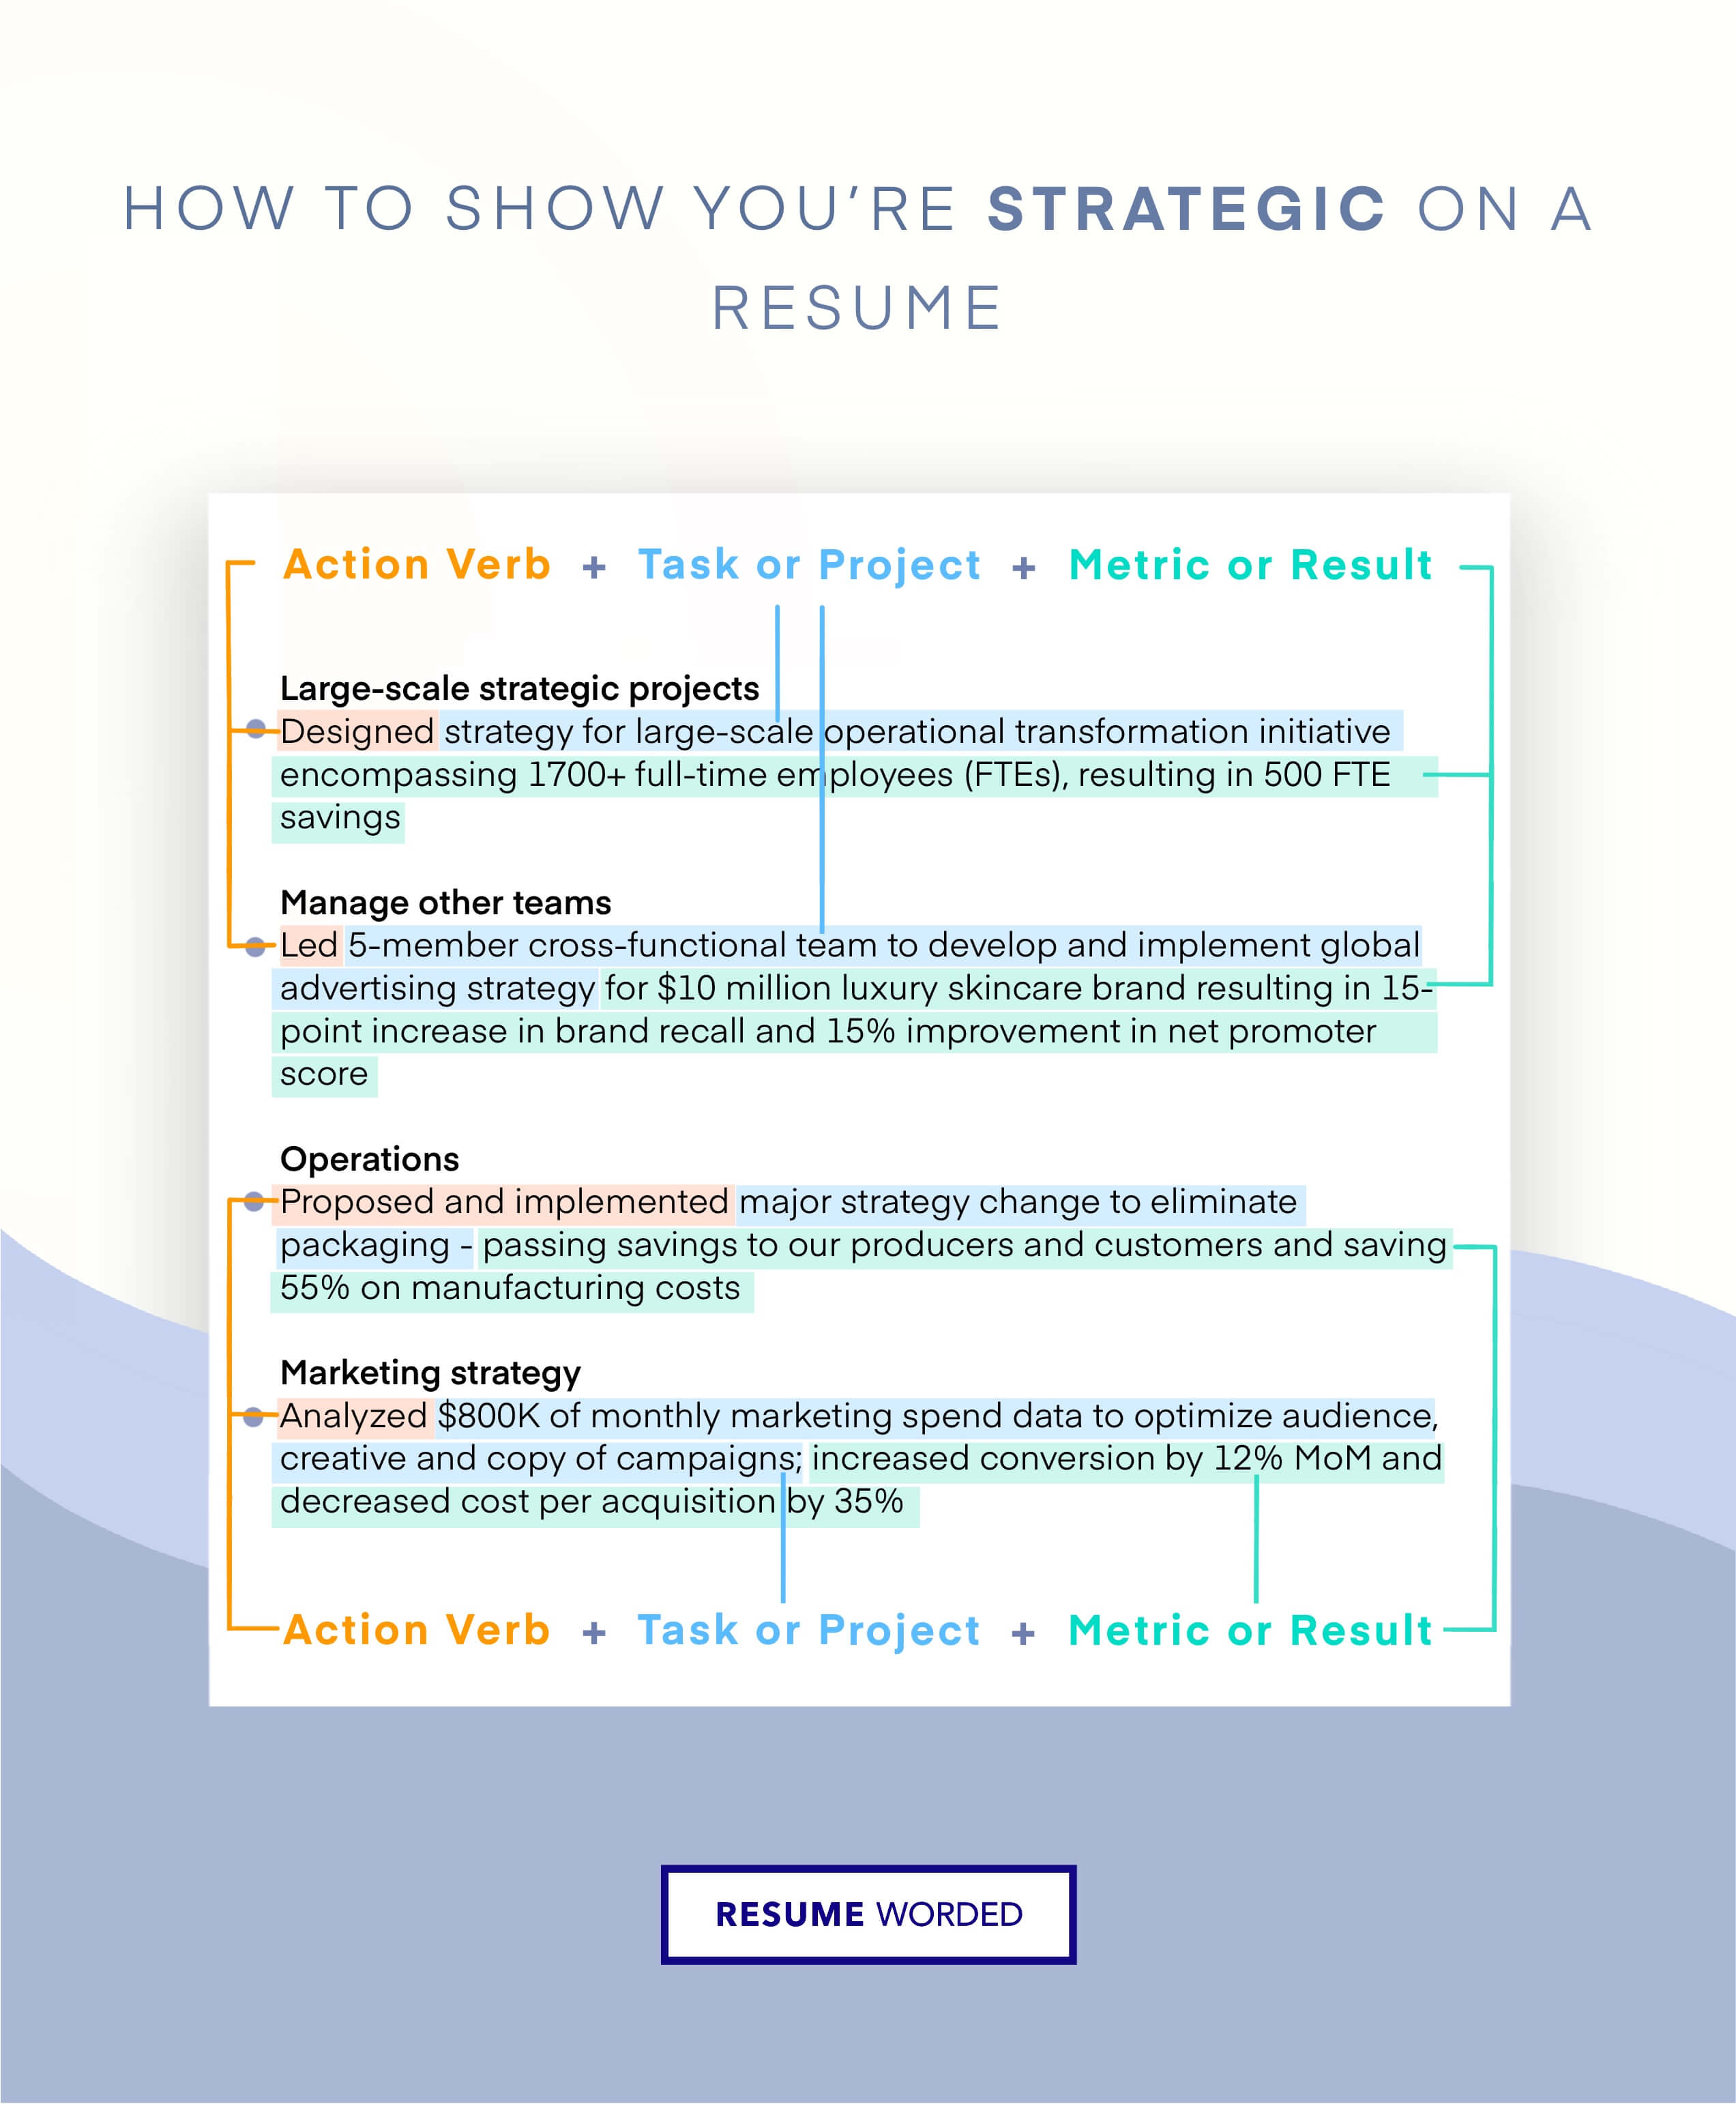 Demonstrate your strategic thinking - Loss Prevention Manager CV